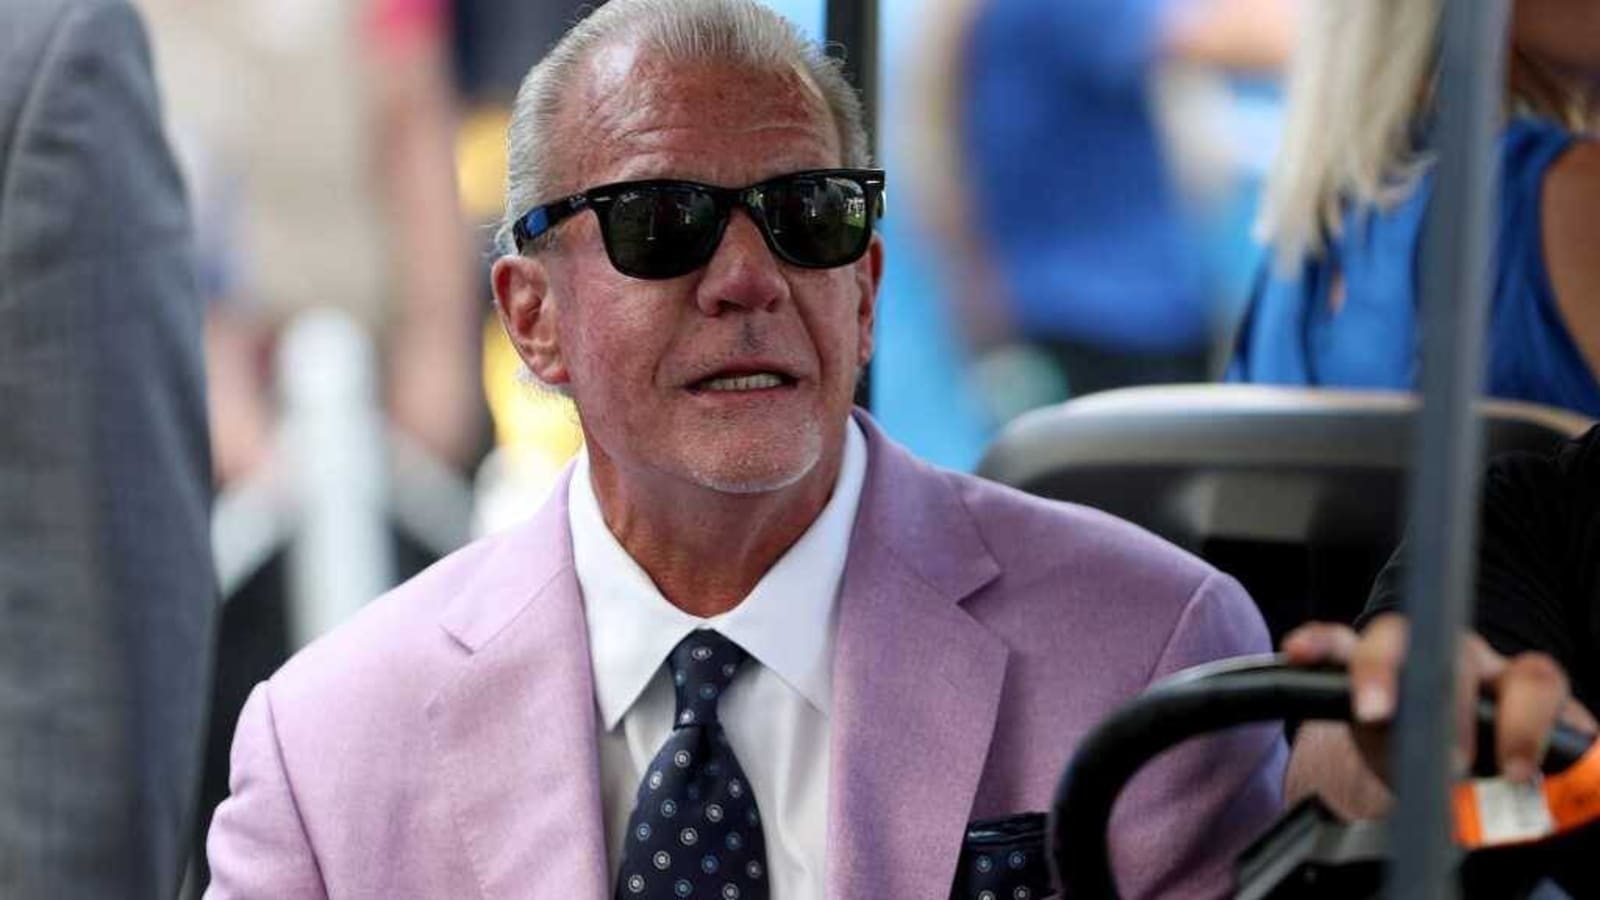 Colts owner Jim Irsay might have just pissed off the NFL with latest X post